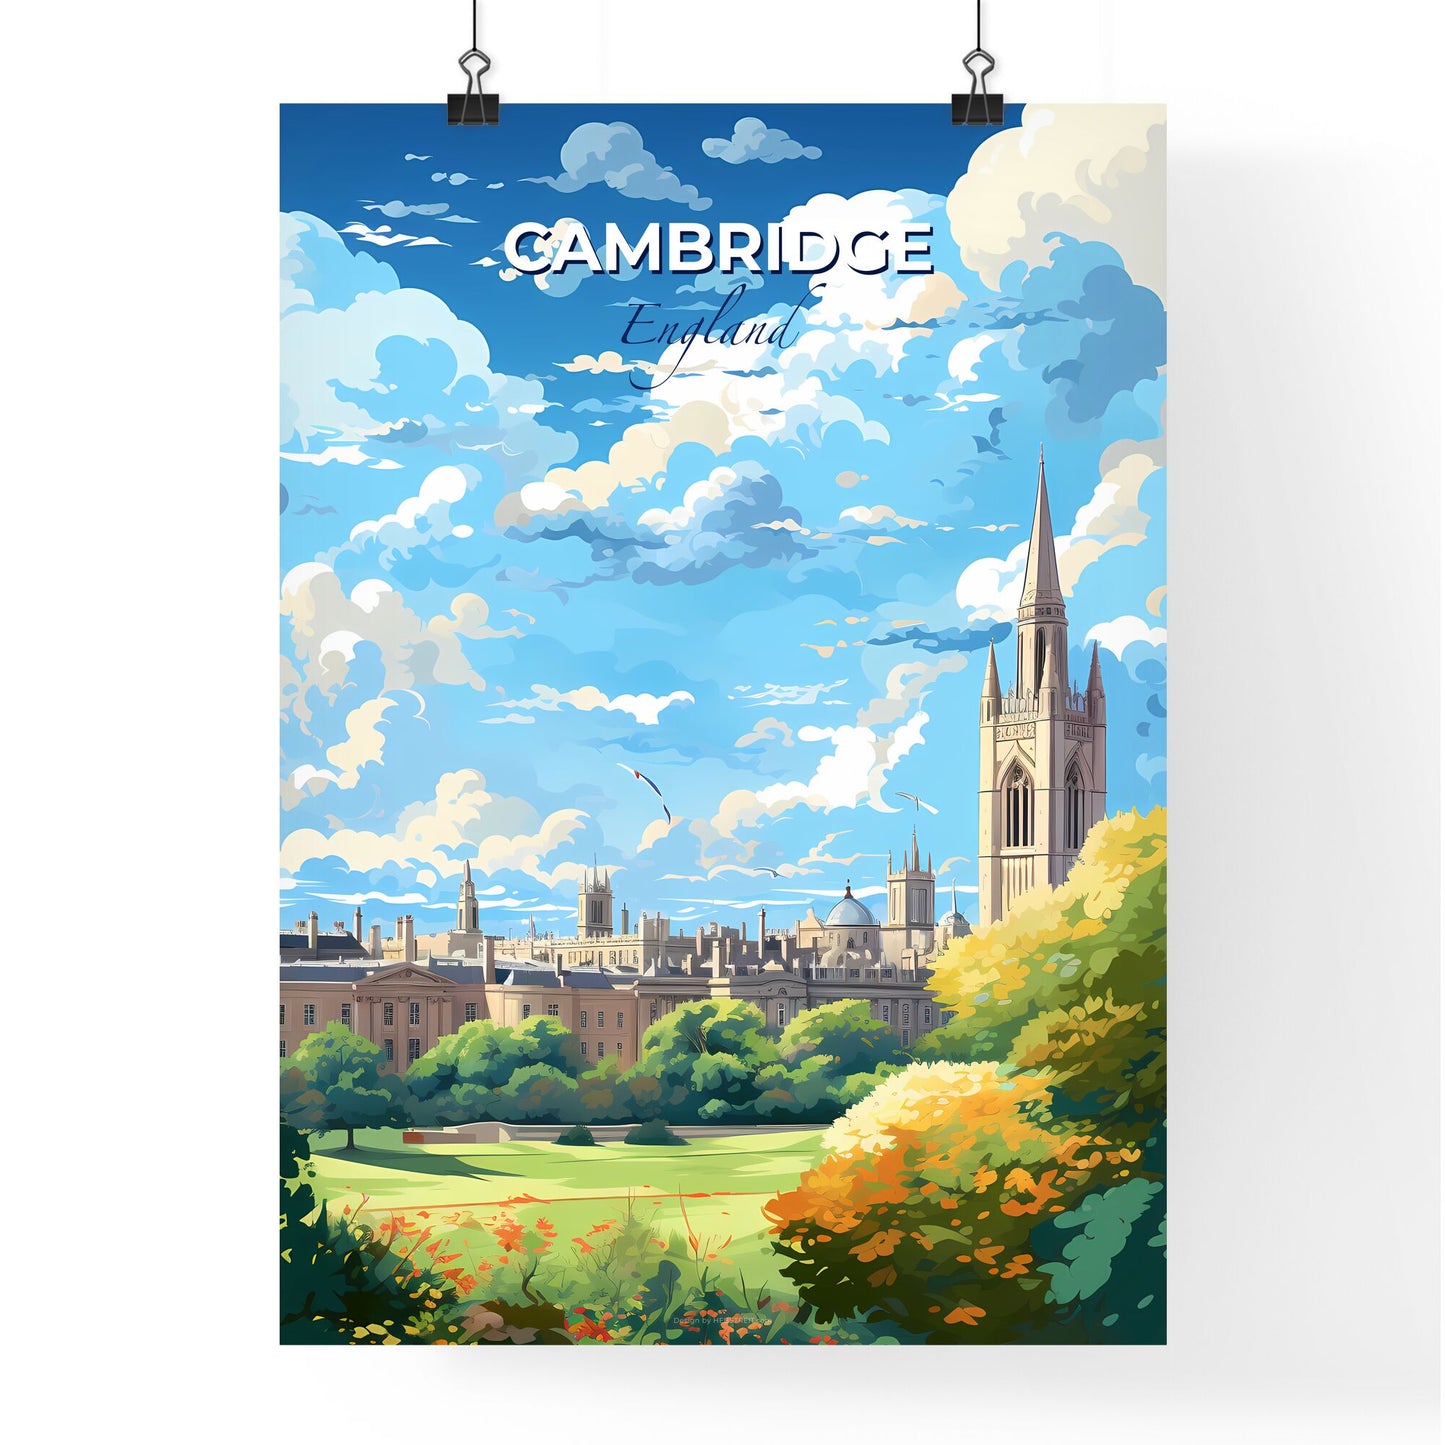 Cambridge England Skyline - A Large Building With A Tower And Trees - Customizable Travel Gift Default Title